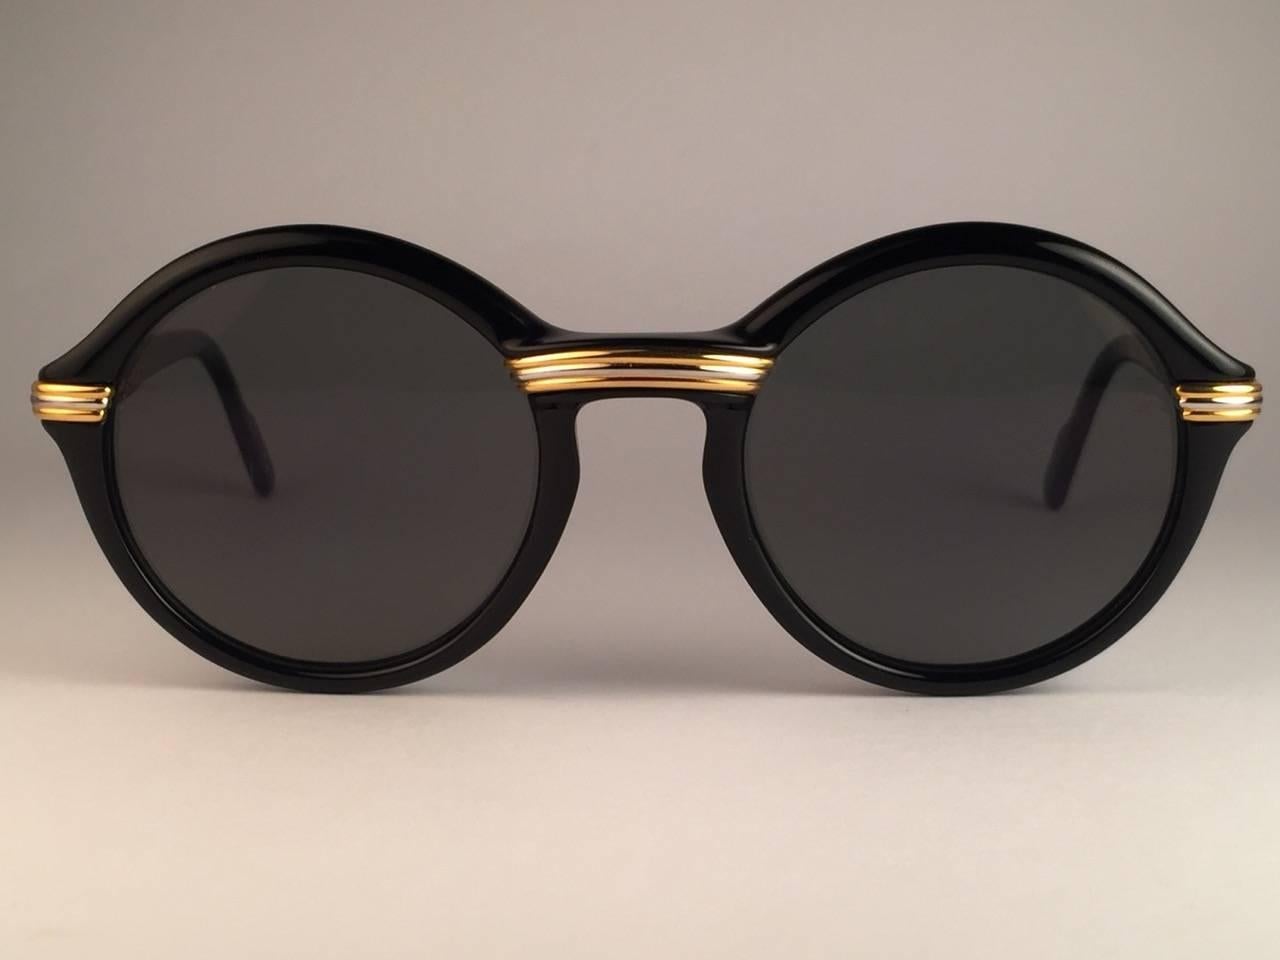 New 1991 Original Cartier Cabriolet Art Deco Black & Gold Sunglasses with slight gold mirror ( uv protection ) lenses Frame has the famous real gold and white gold accents in the middle and on the sides.  All hallmarks. Cartier gold signs on the